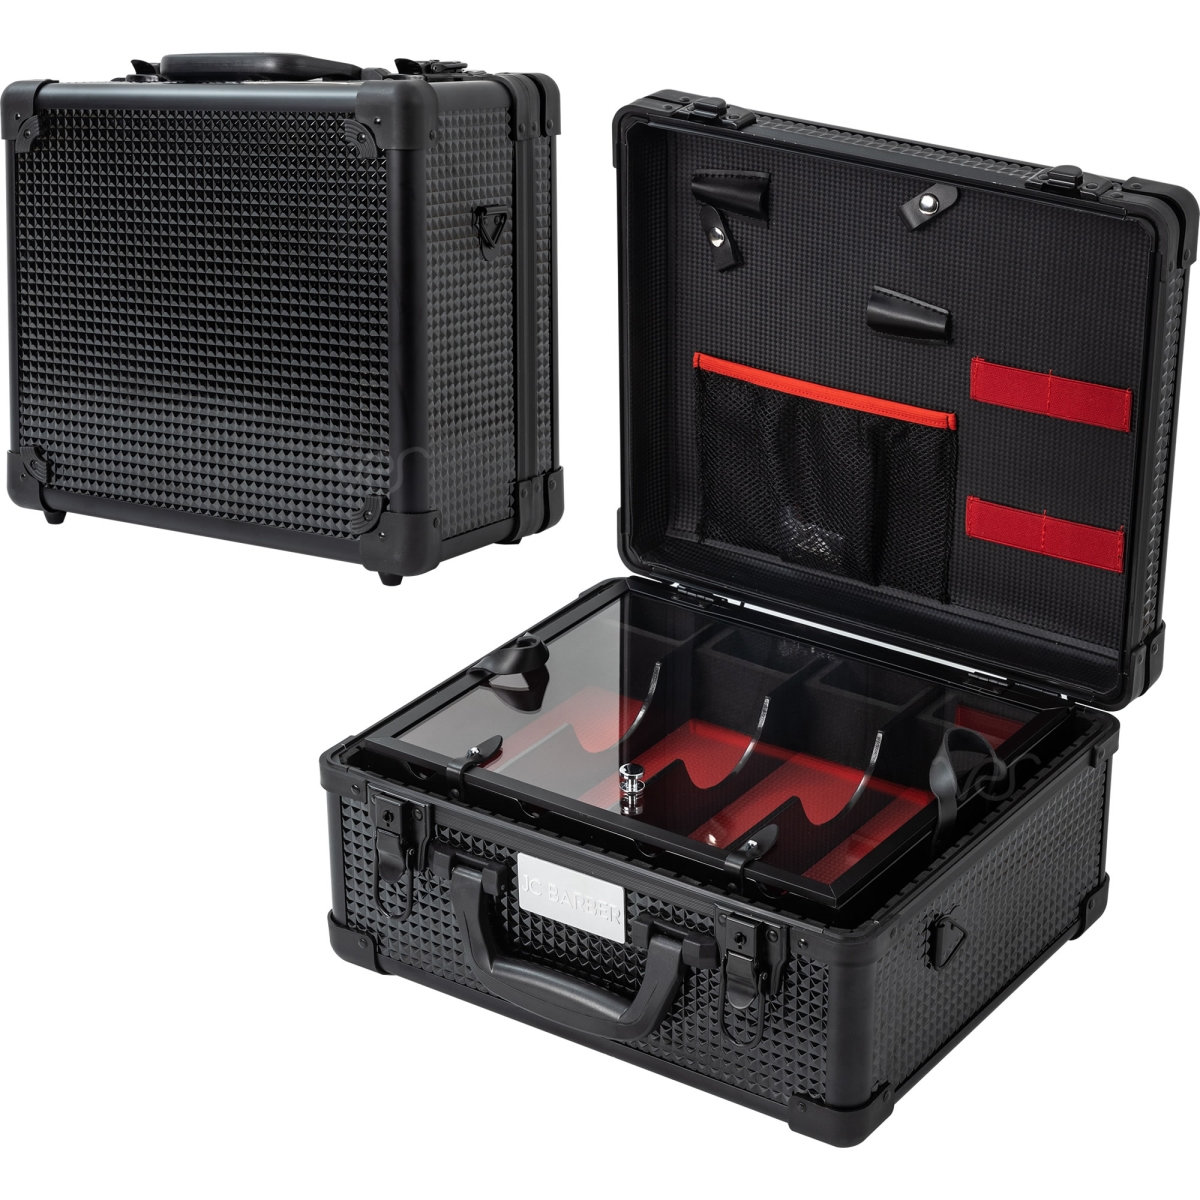 Picture of Jcbarber JBC001-152 Black Ice Cube Professional Barber Portable Travel Case with 4 Clippers Removable Tray